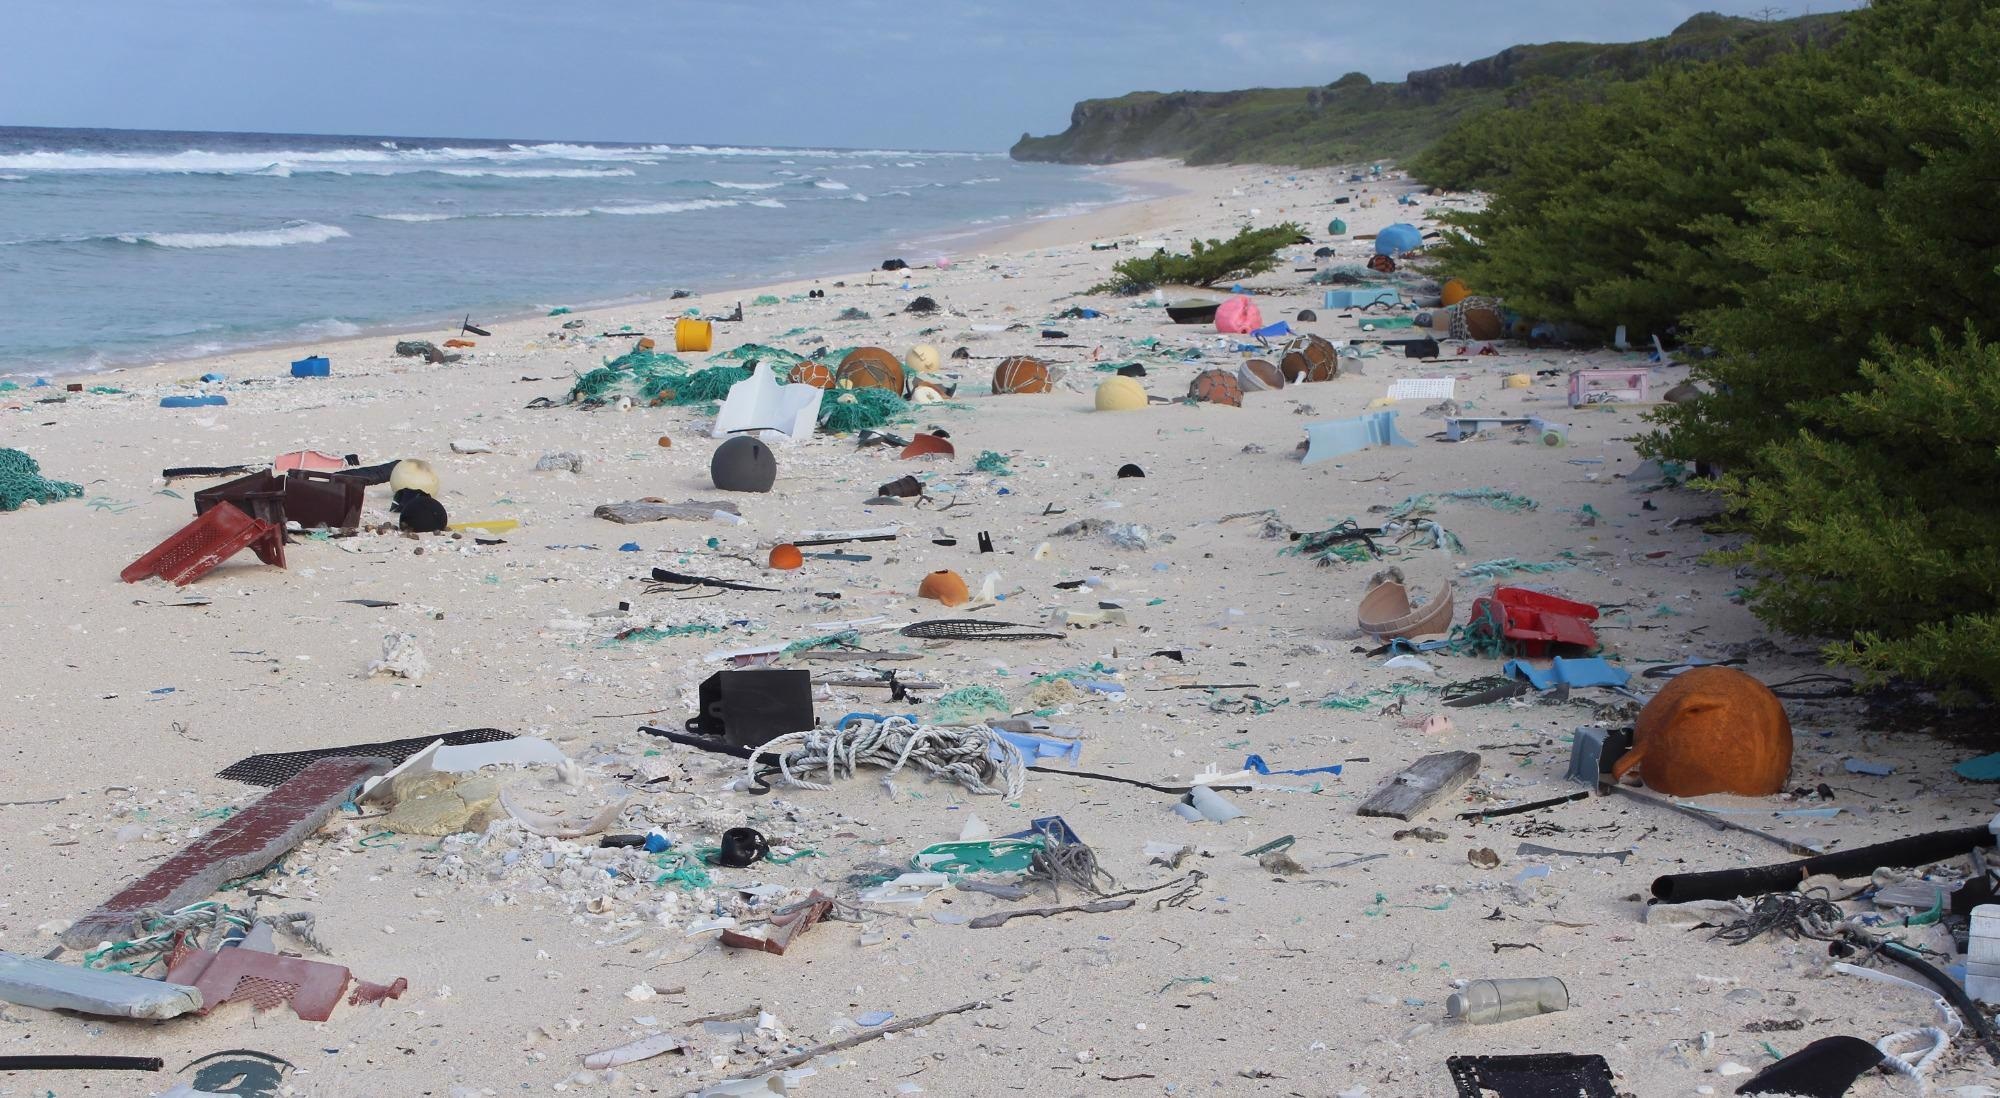 Remote Islands Shed Light on Extent of Worldwide Plastic Pollution